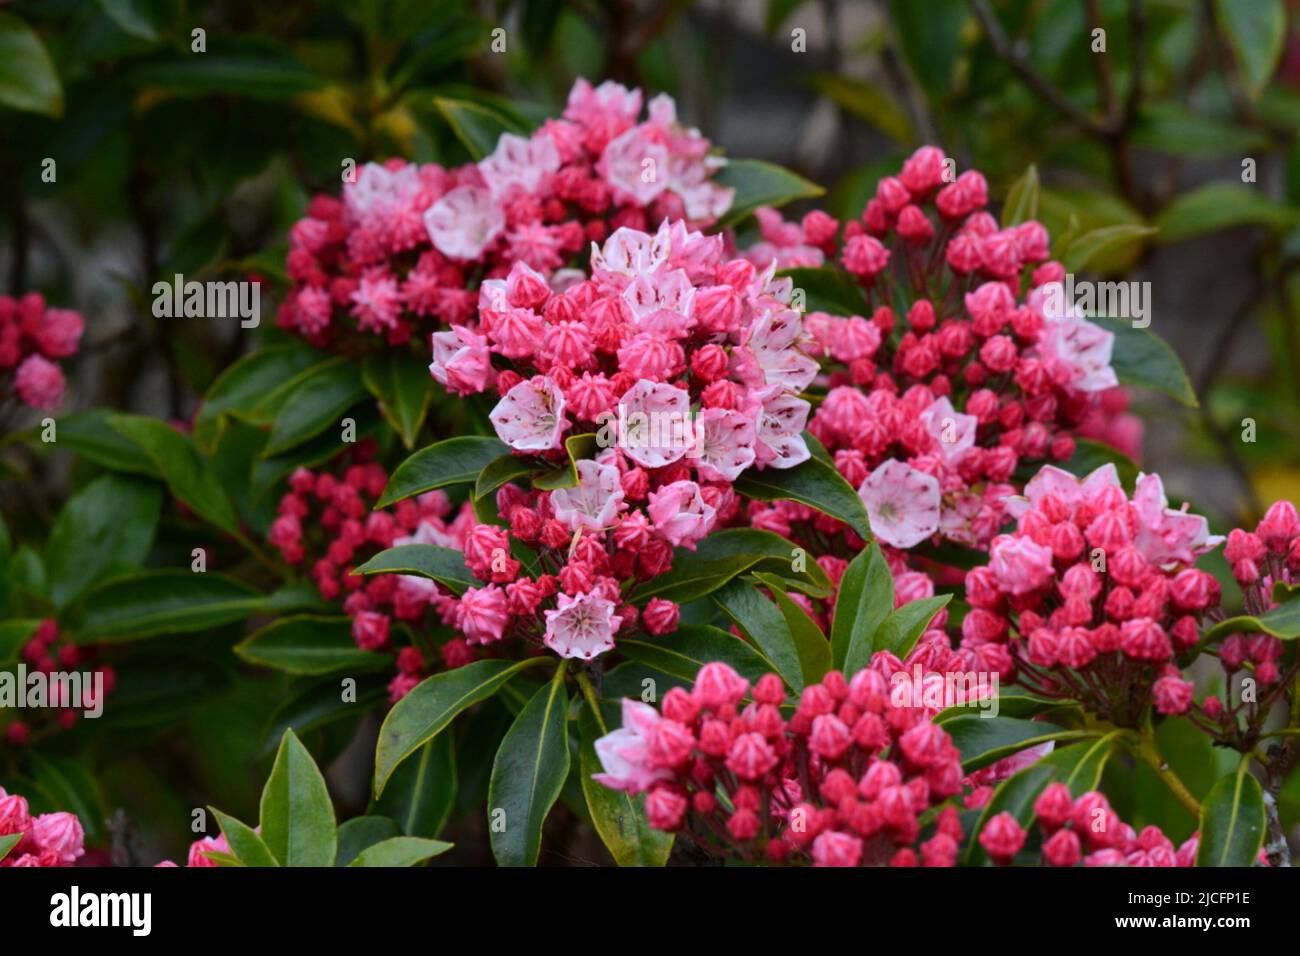 Kalmia latifolia Olympic Fire Mountain Laurel Olympic Fire clusters of large cup-shaped crimped pink flowers opening from red buds Stock Photo